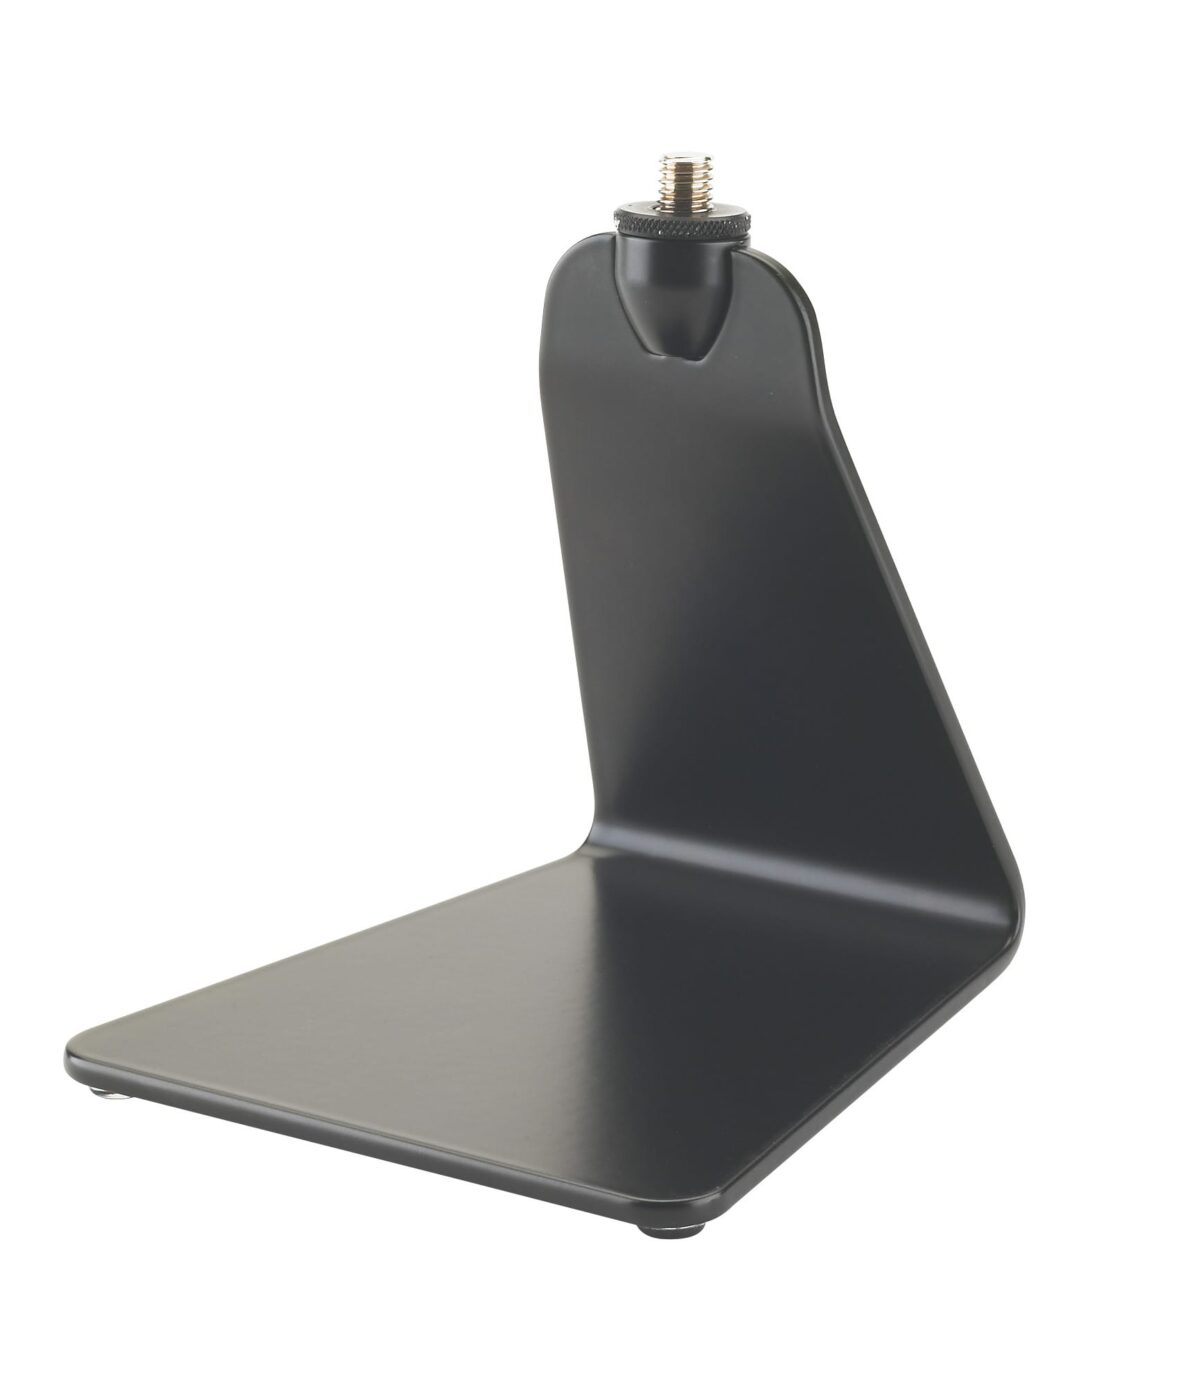 The black 23250 Design Microphone Table Stand from K&M features a flat line design and functionality